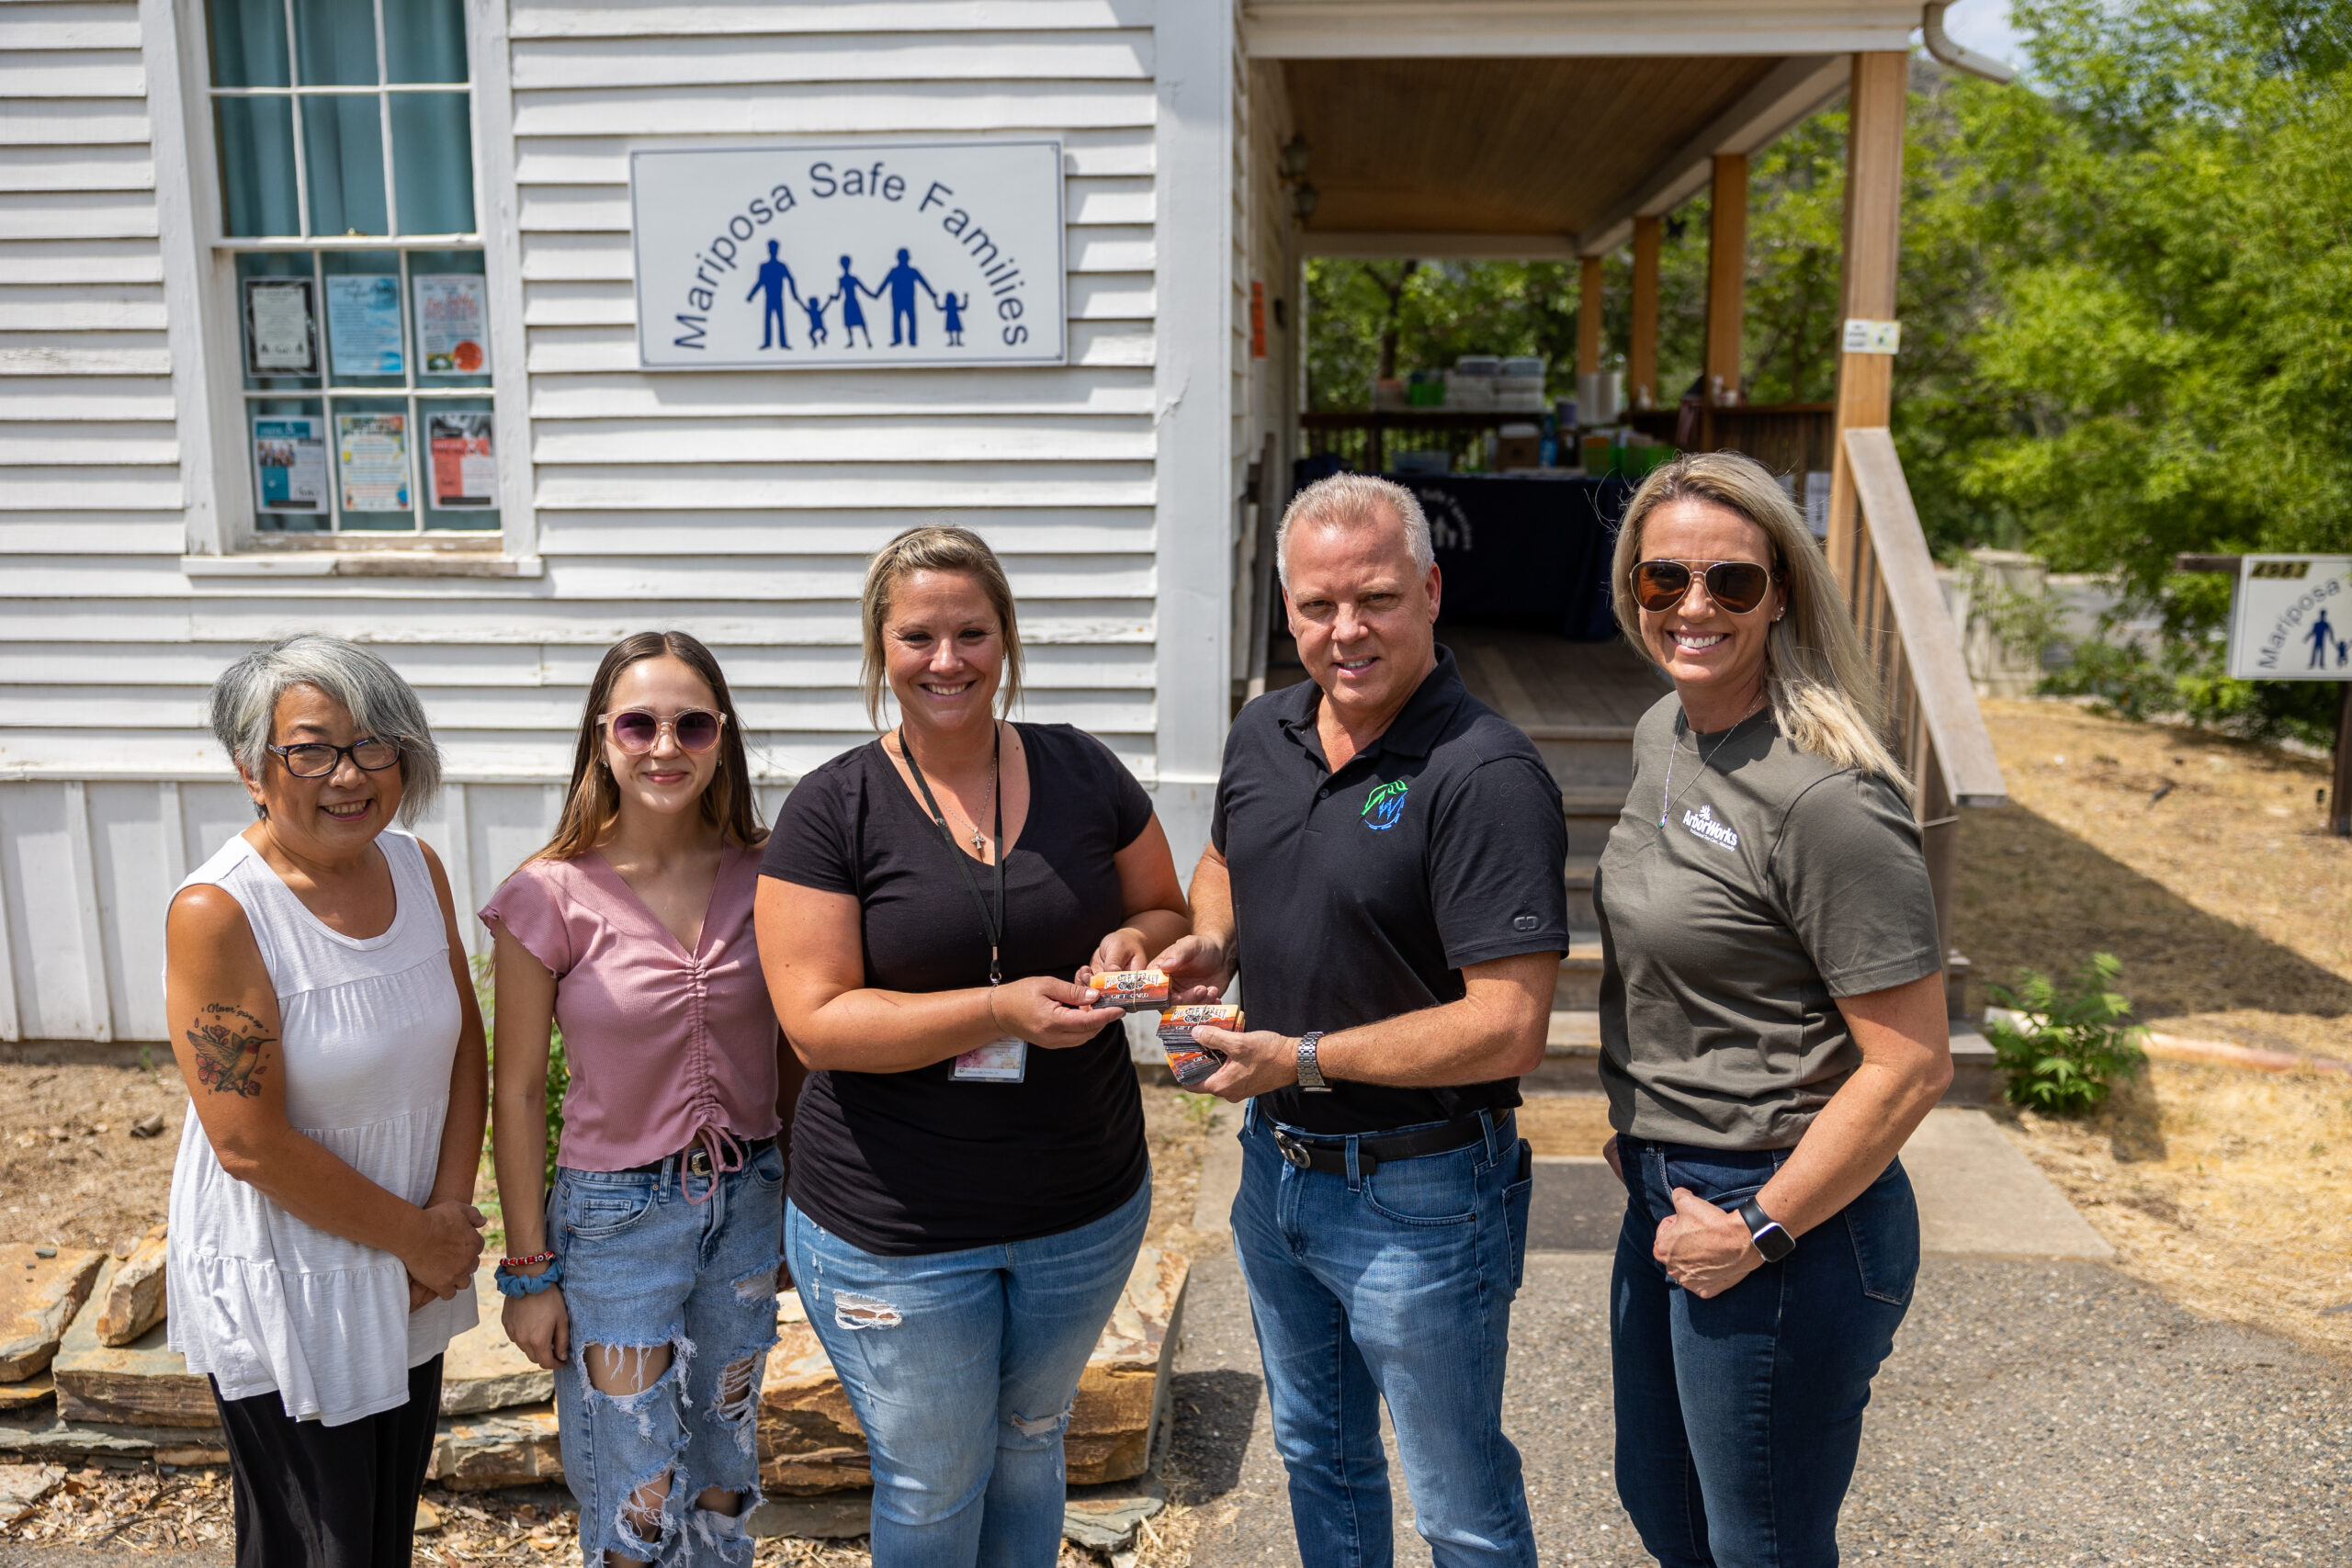 Left to right, Donna Santi, Heather Livingston and Megan Atkinson from Mariposa Safe Families with Frank Bardonaro and myself delivering the gift cards on July 28, 2022 | Picture by Owen Lee